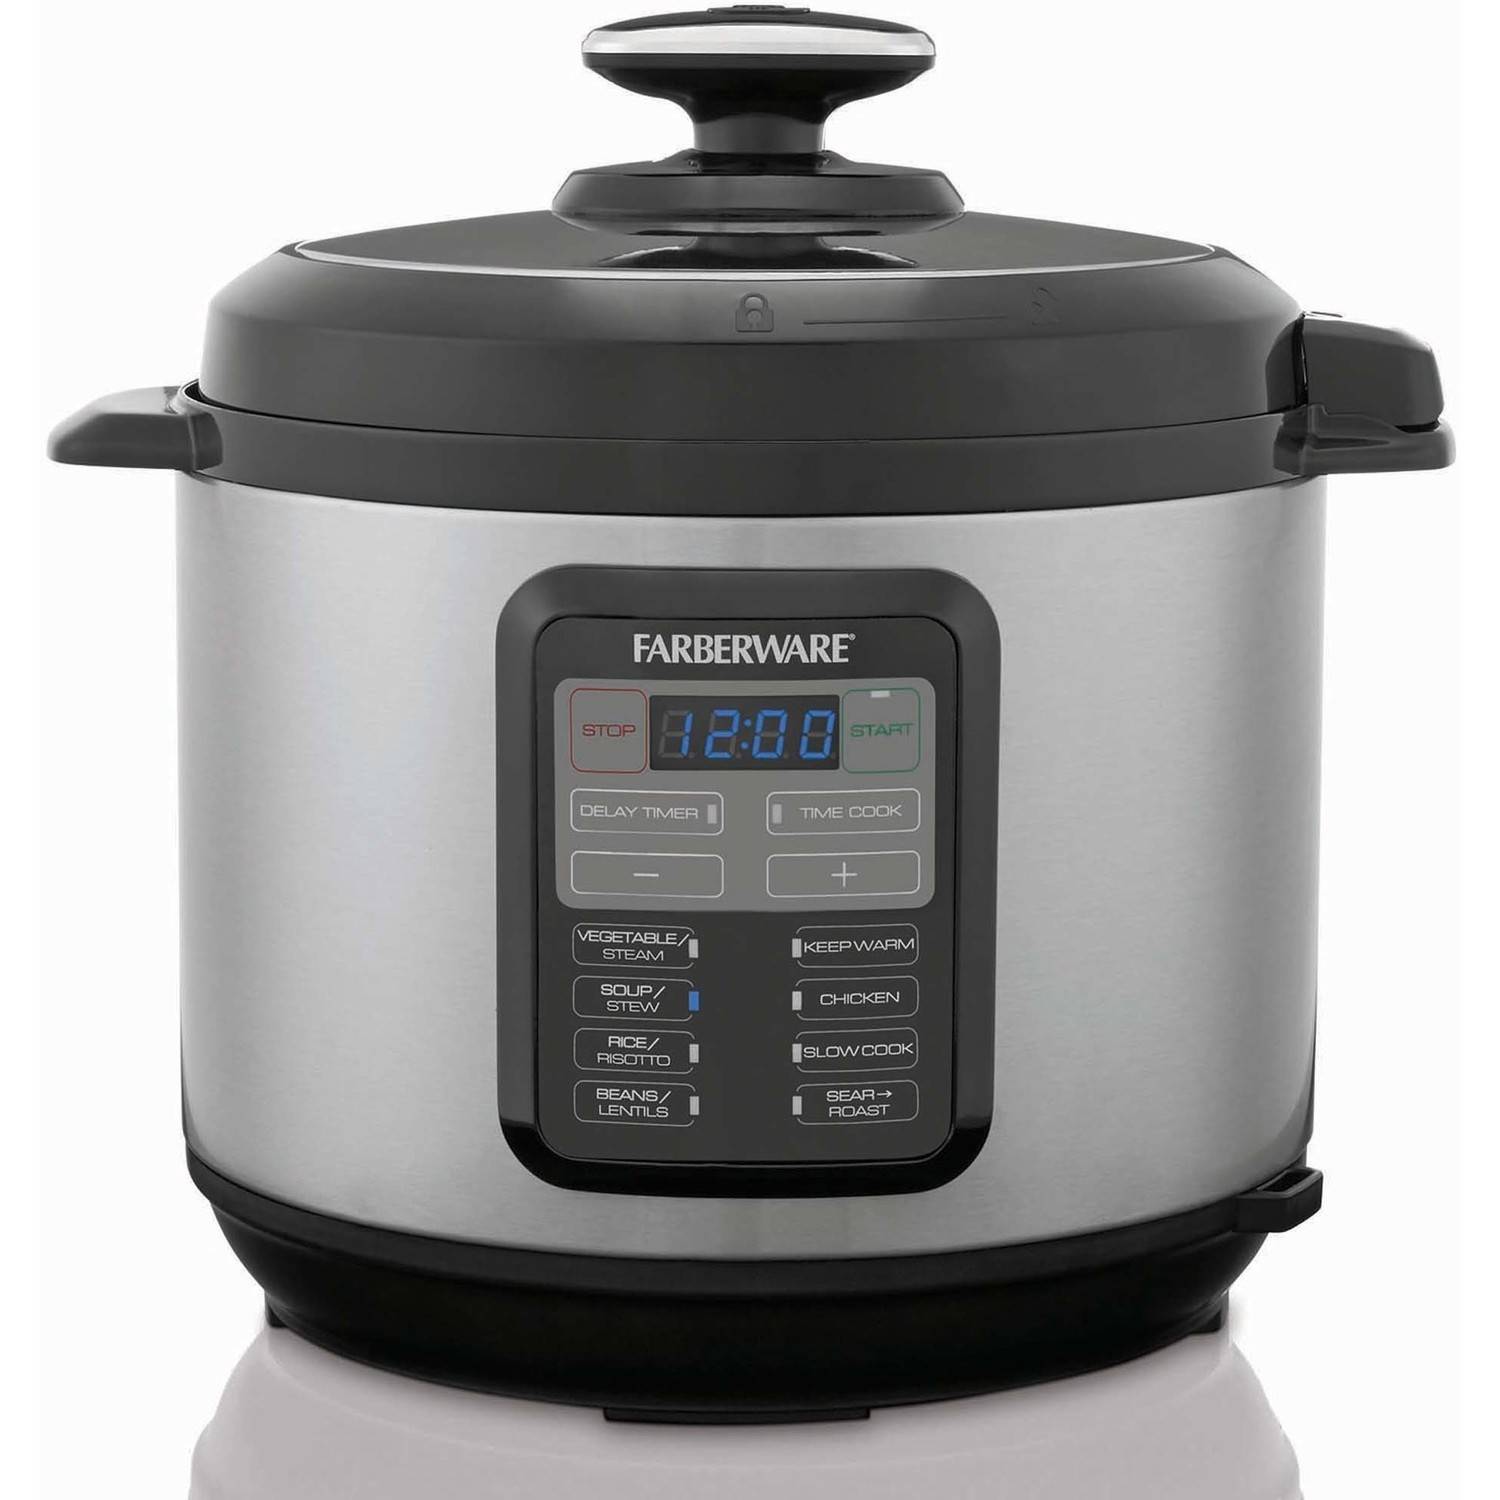 How To Set Manual Cook On Farberware Electric Pressure Cooker